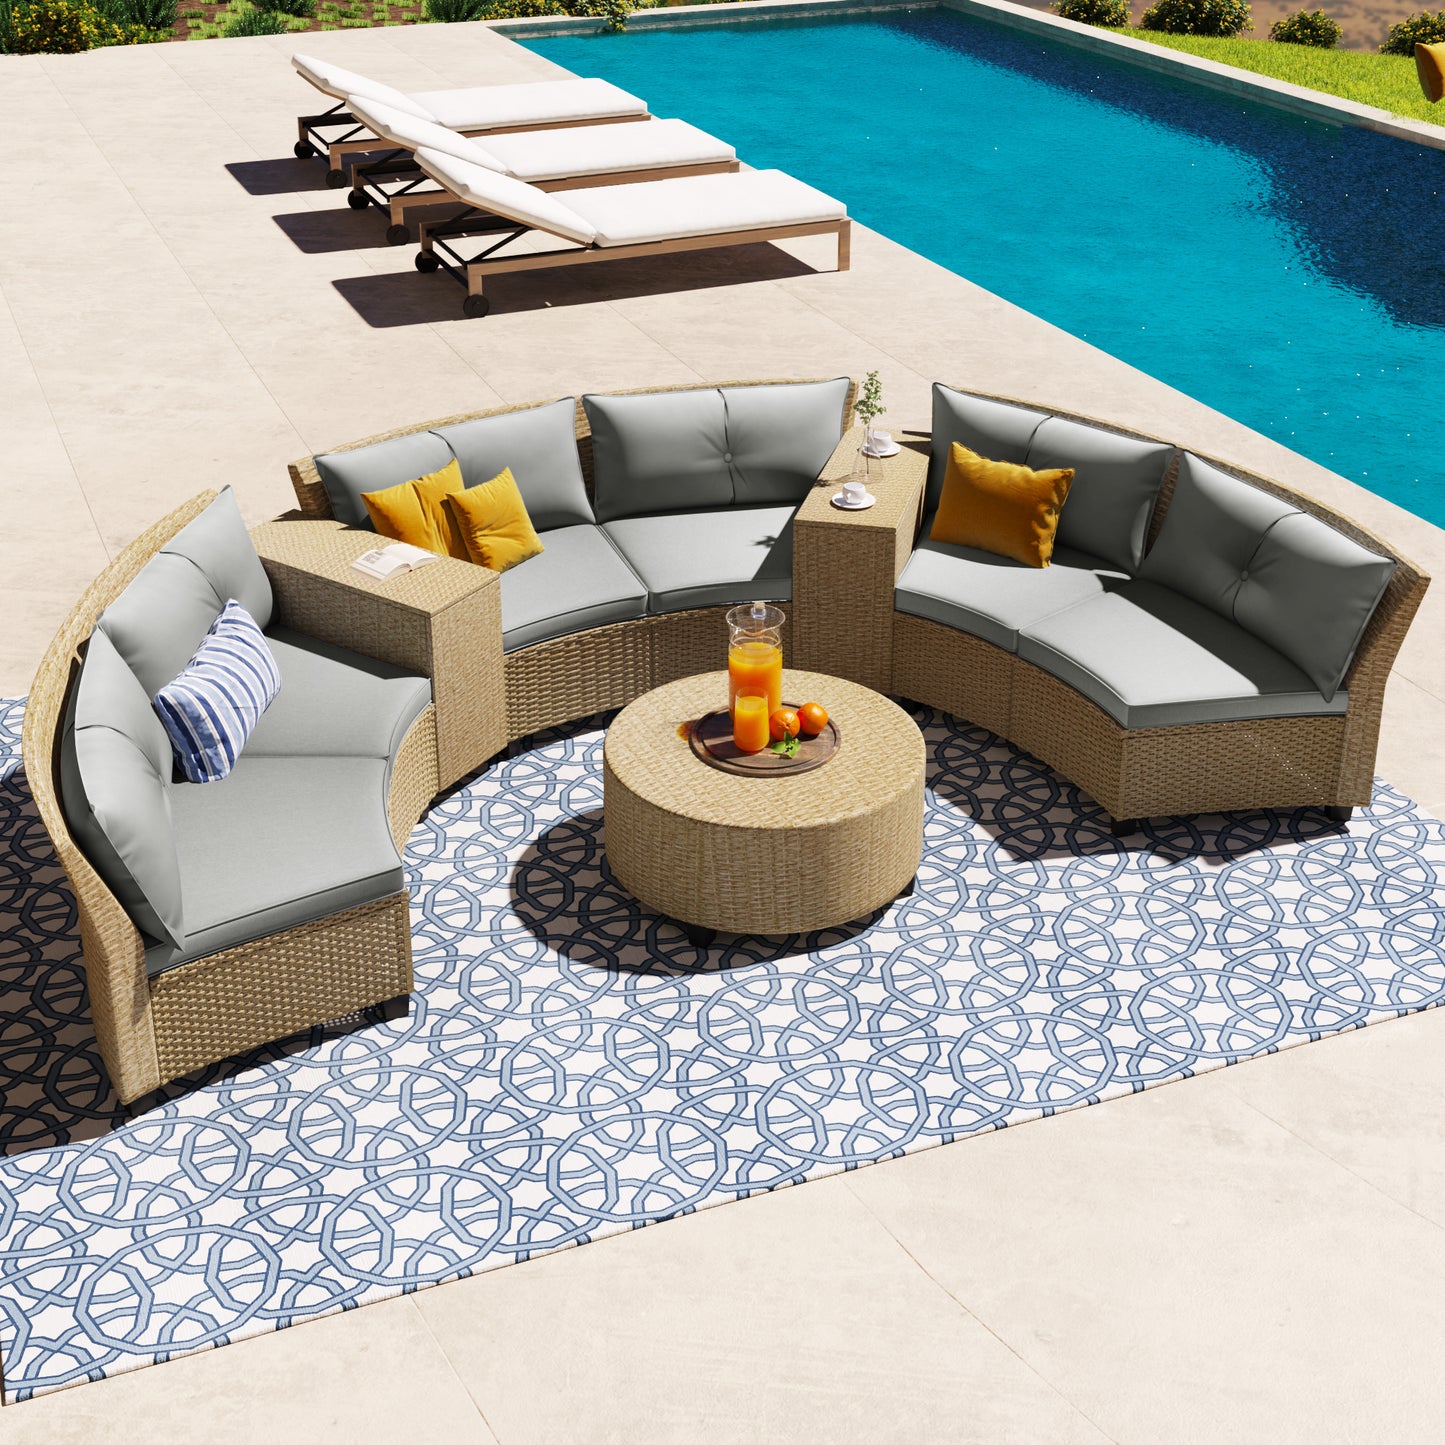 HDPE Rattan 6-Person Fan-shaped Suit with Cushions and Table